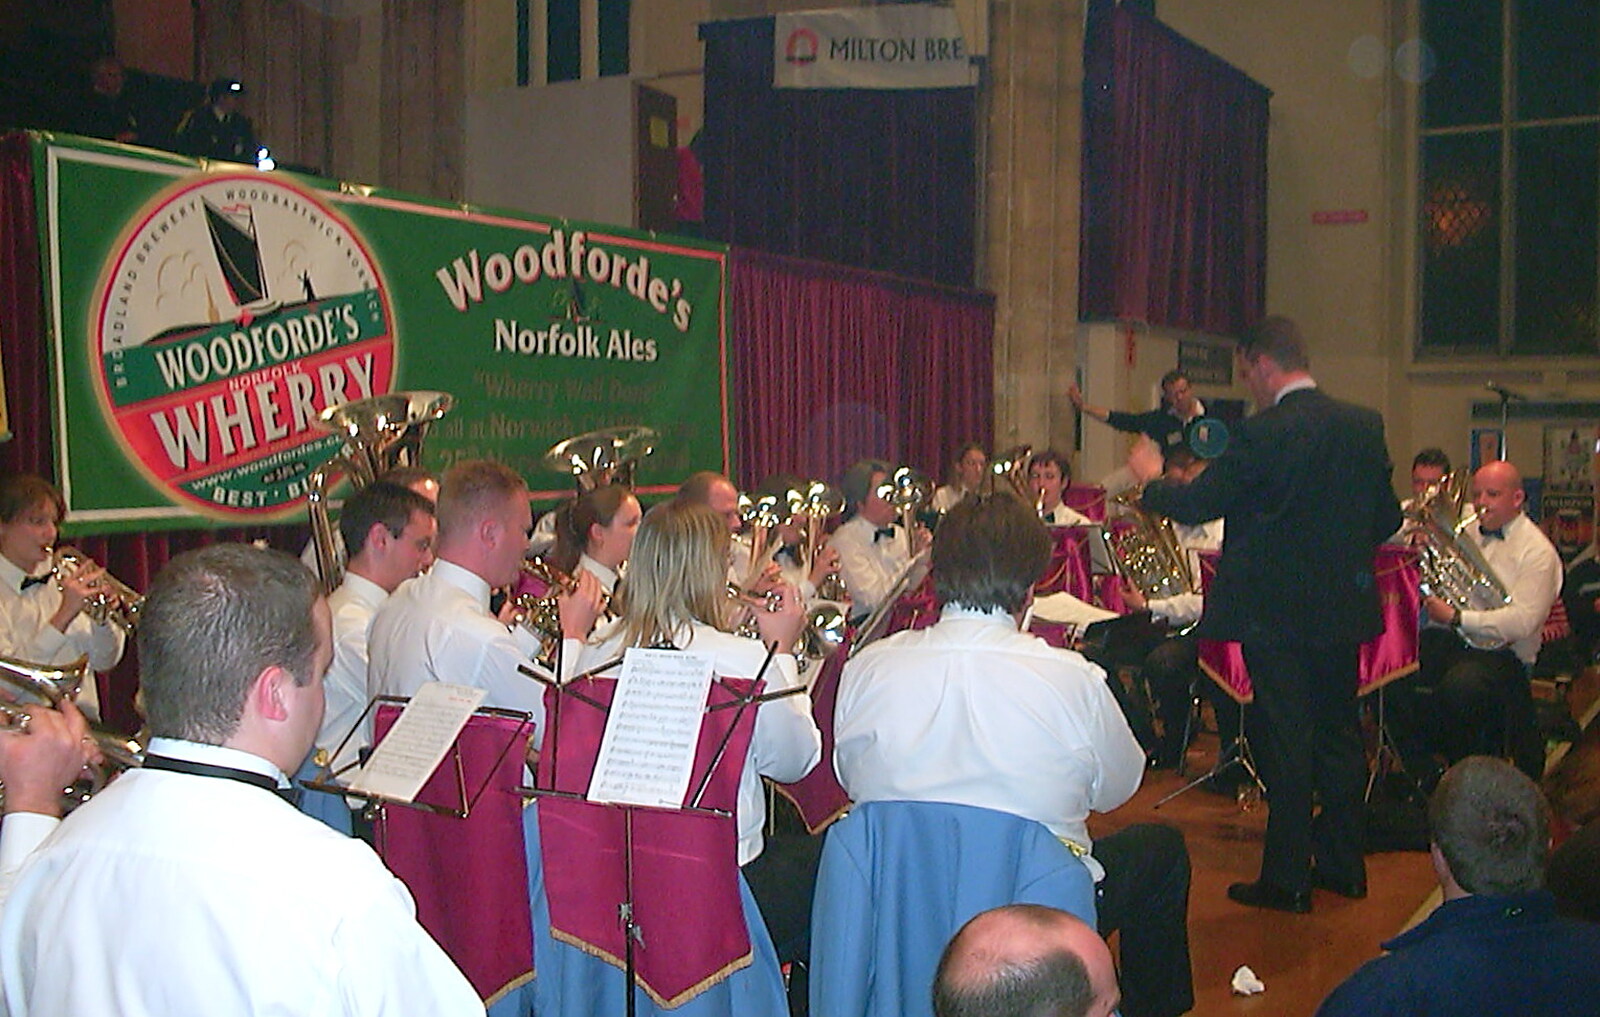 The Cawston Silver Band from The Norwich Beer Festival, St. Andrew's Hall, Norwich - 26th October 2002